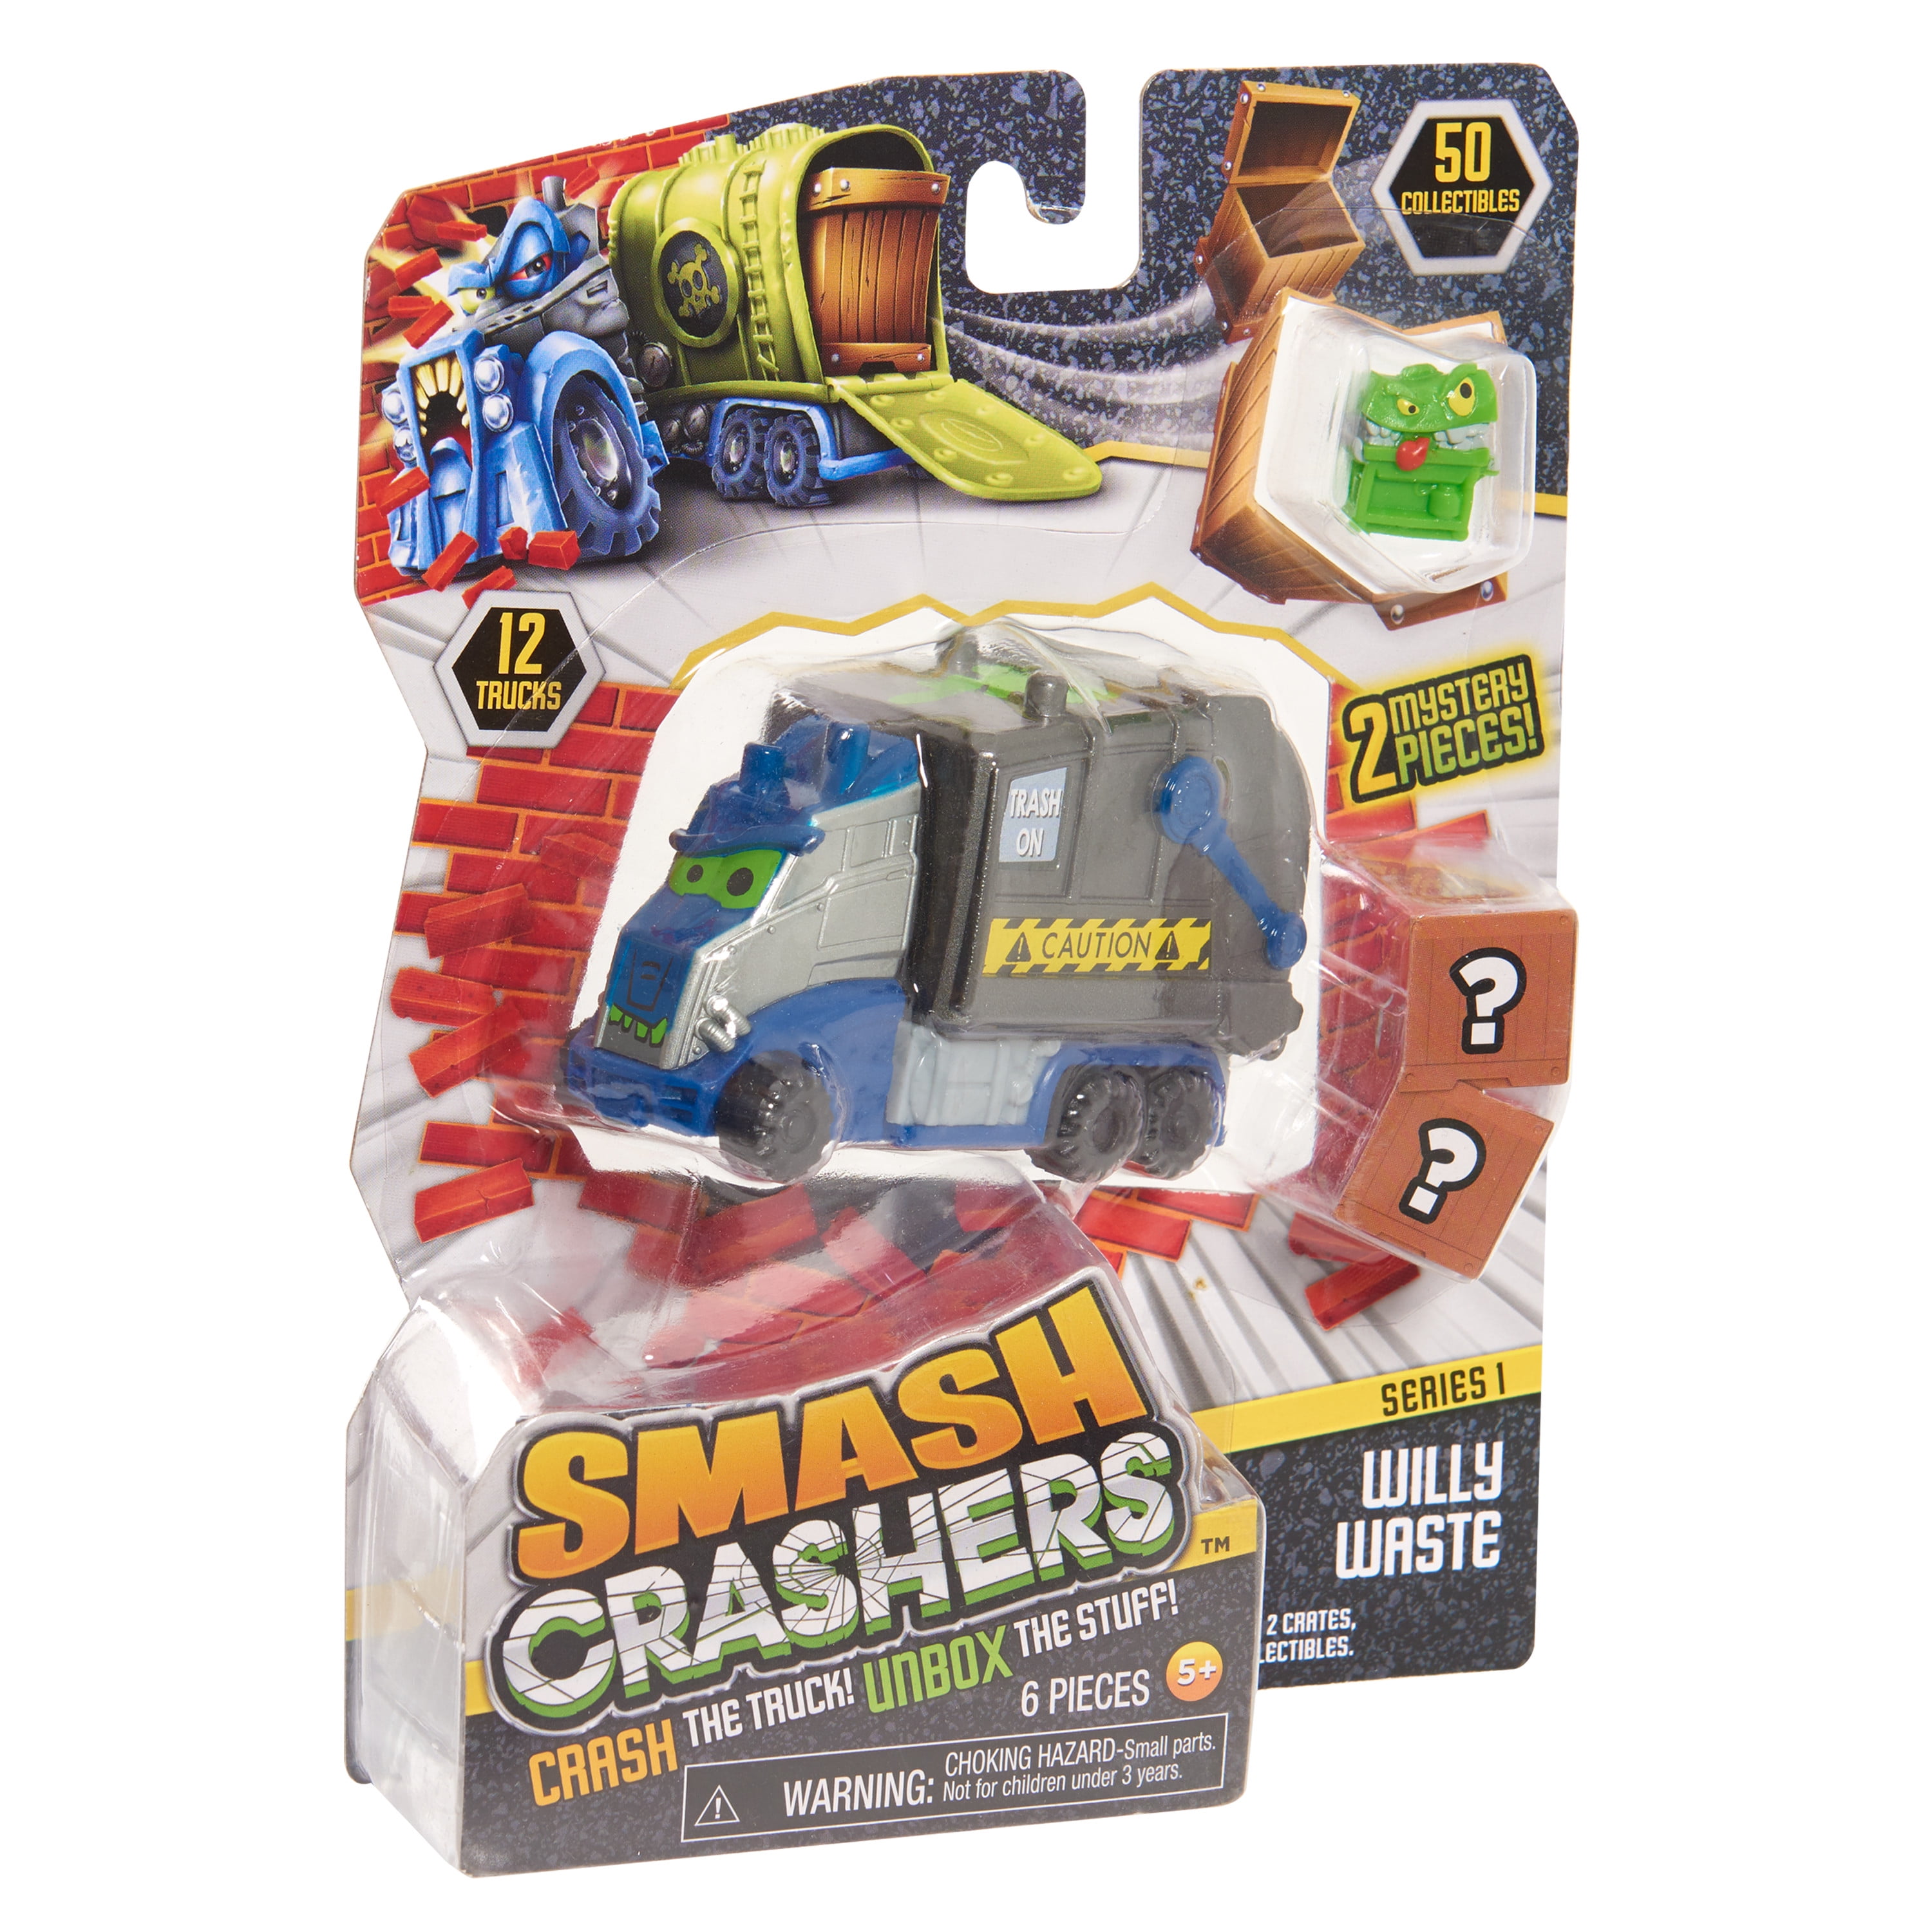 Crash! Smash! Boom! The Best Toys for Boys (ages 8 to 13